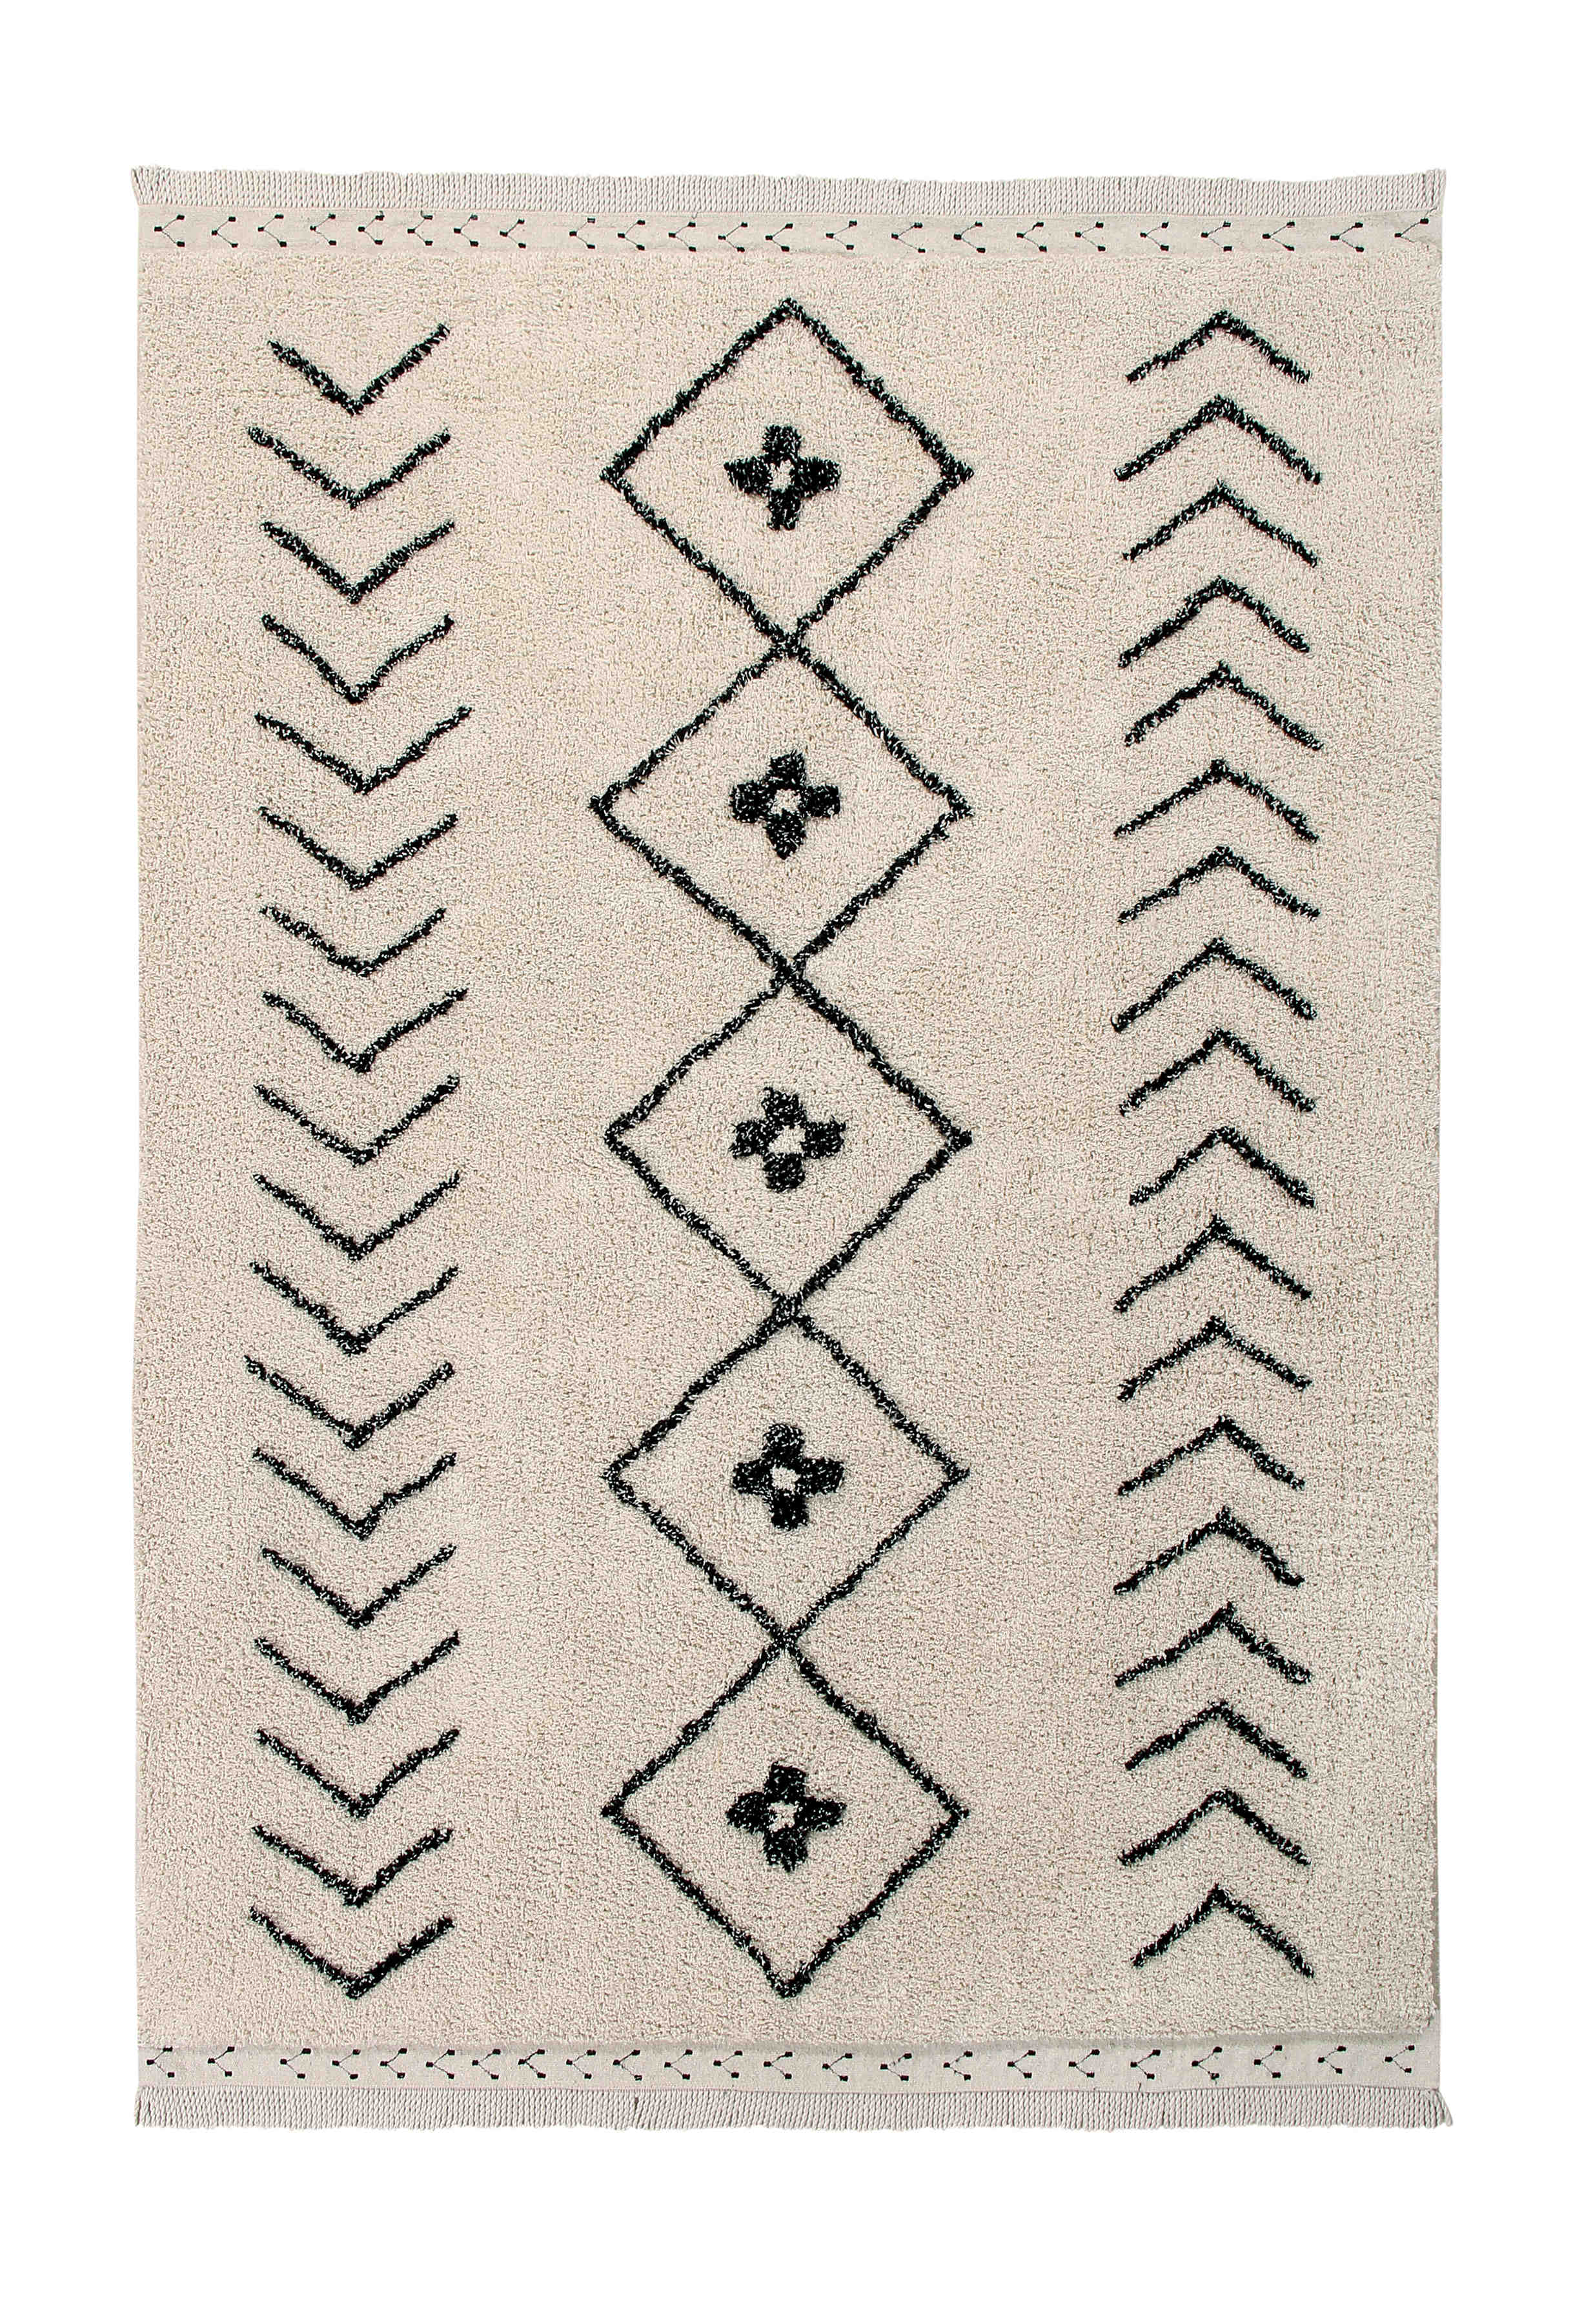 Rectangular beige cotton rug decorated with a black moroccan tribal designs